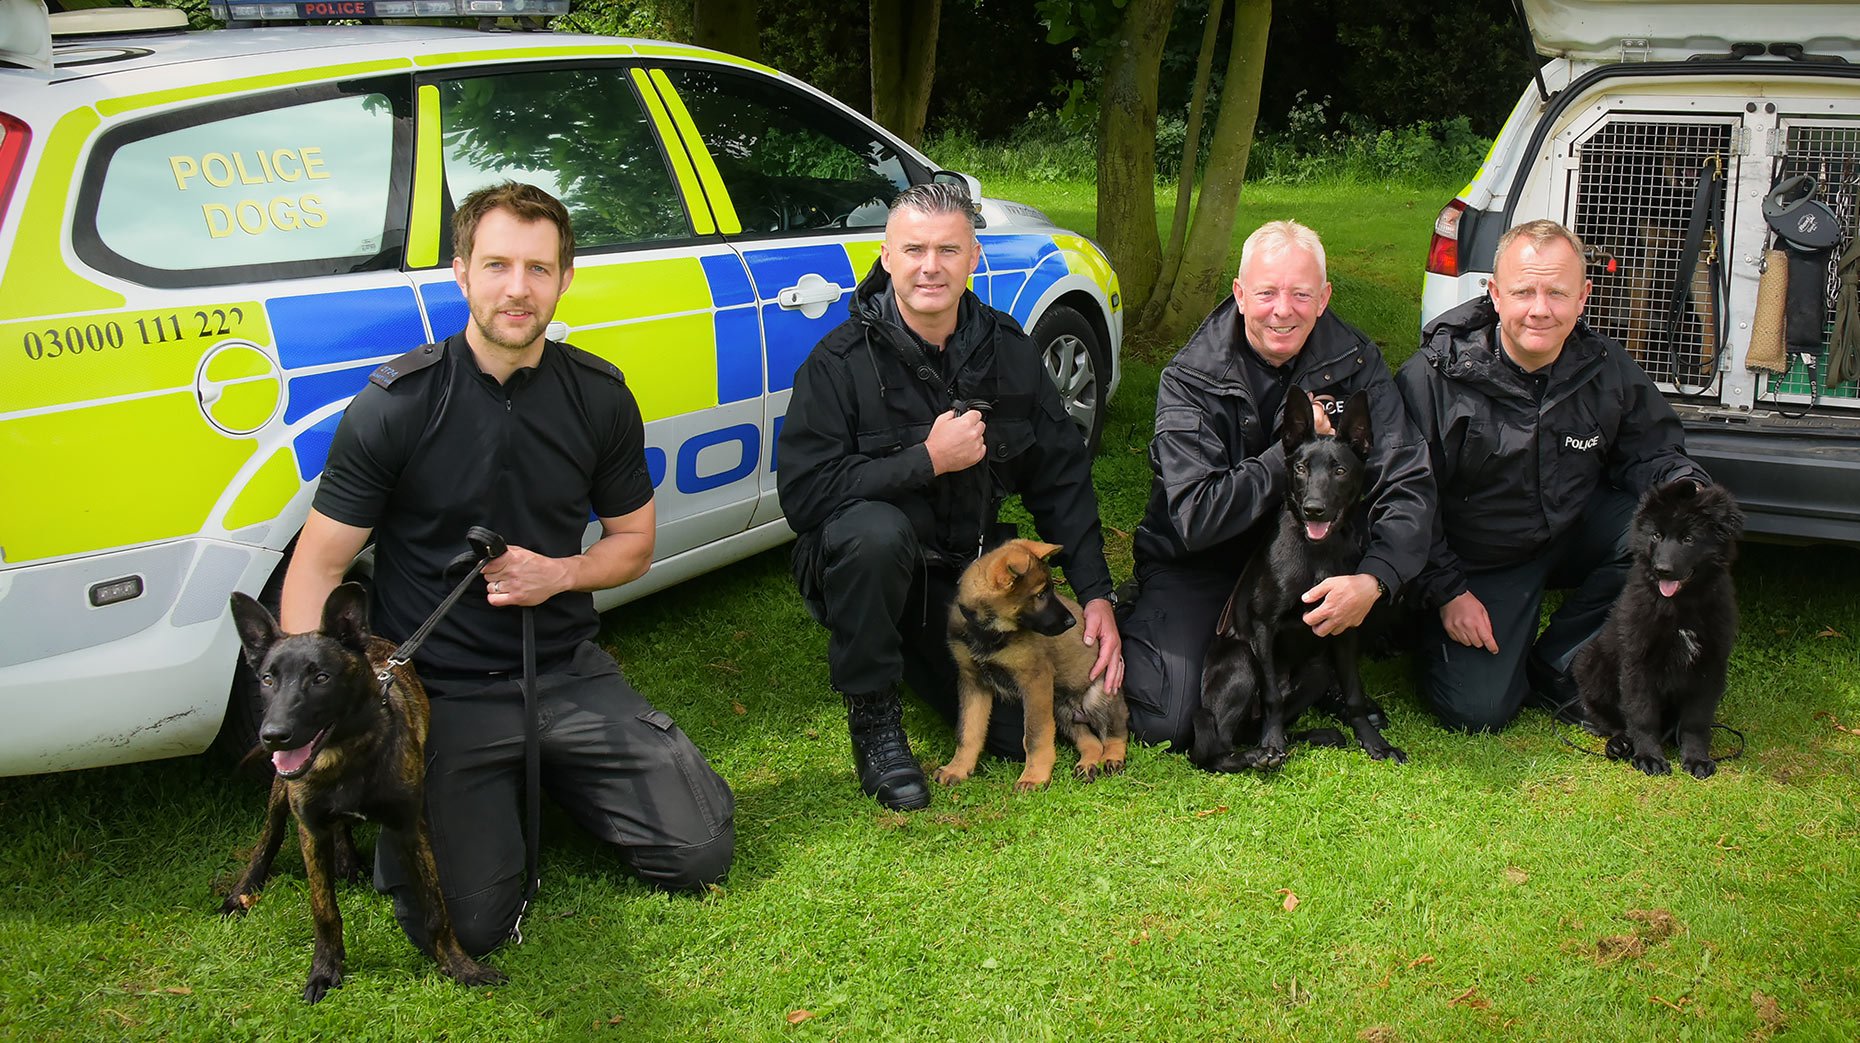 From left to right: PC Mark Haywood and Riggs, PC Jon Peacock and Olly, PC Stu Hazard and Lionel and PC Ian McDonald and Mac.